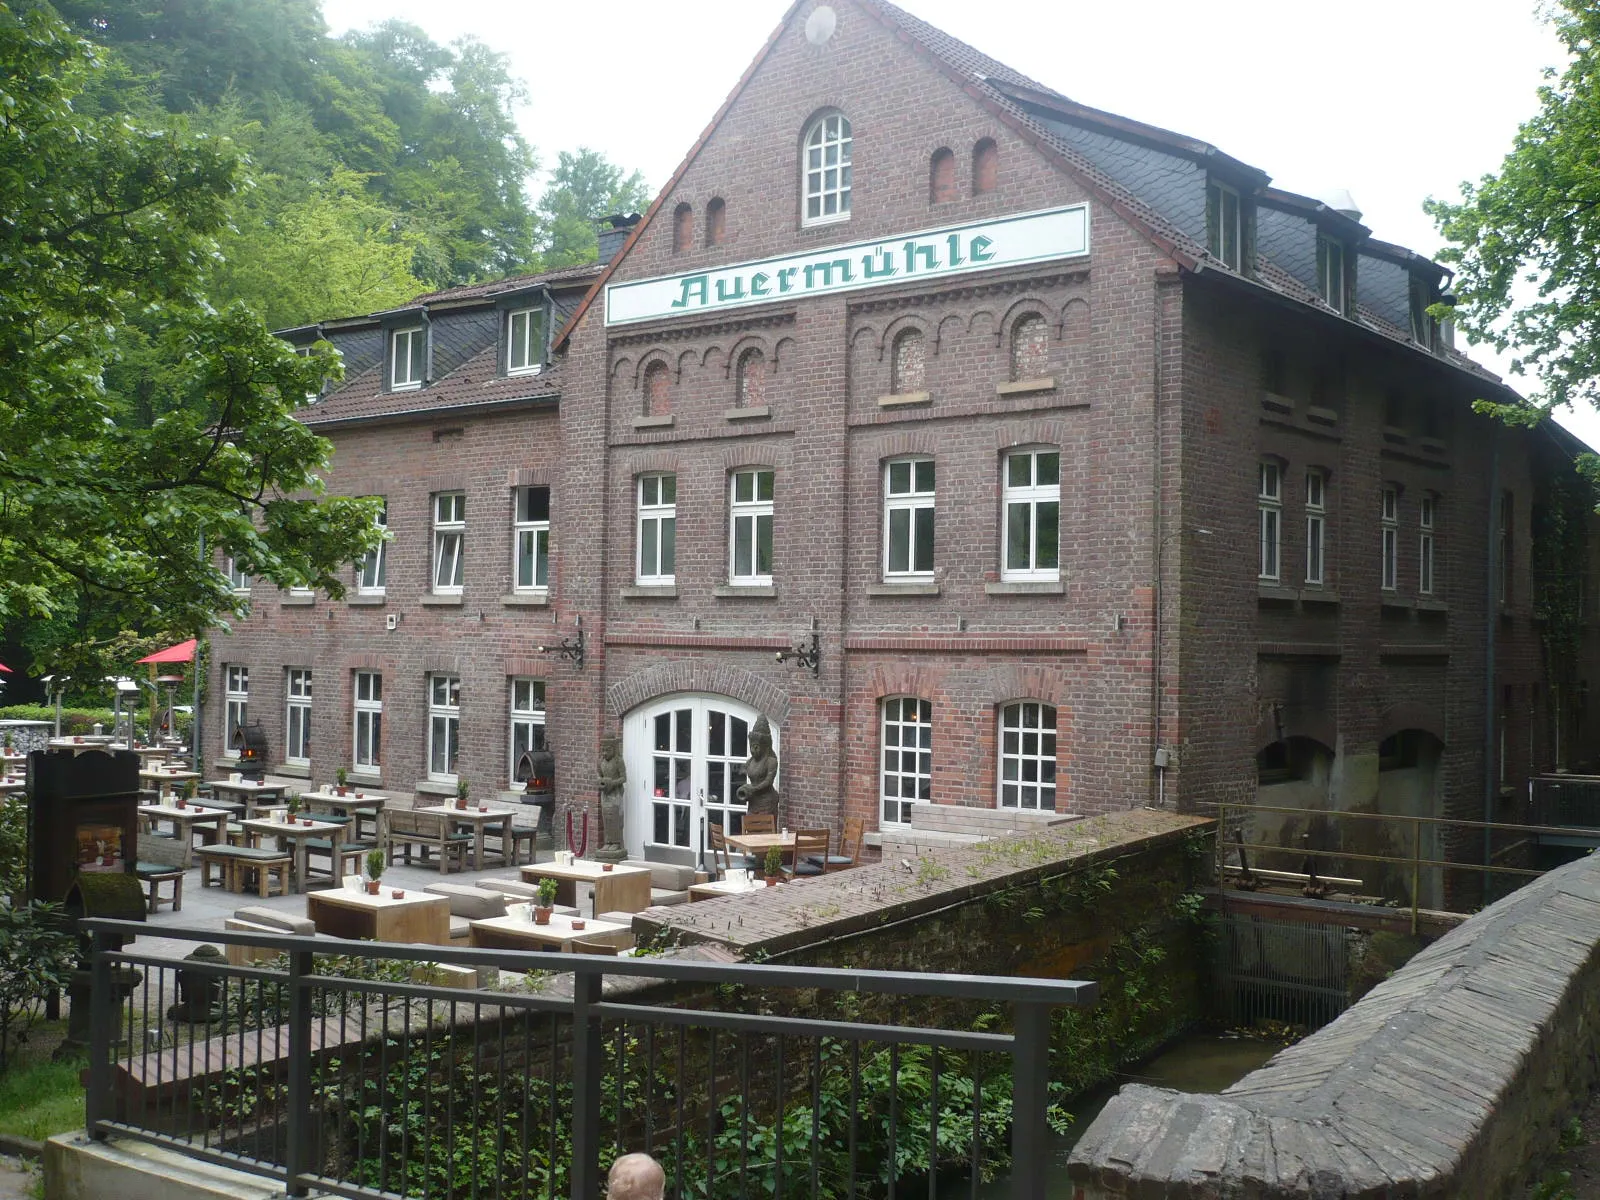 Photo showing: The Auermühle, a former watermill in Ratingen, Germany